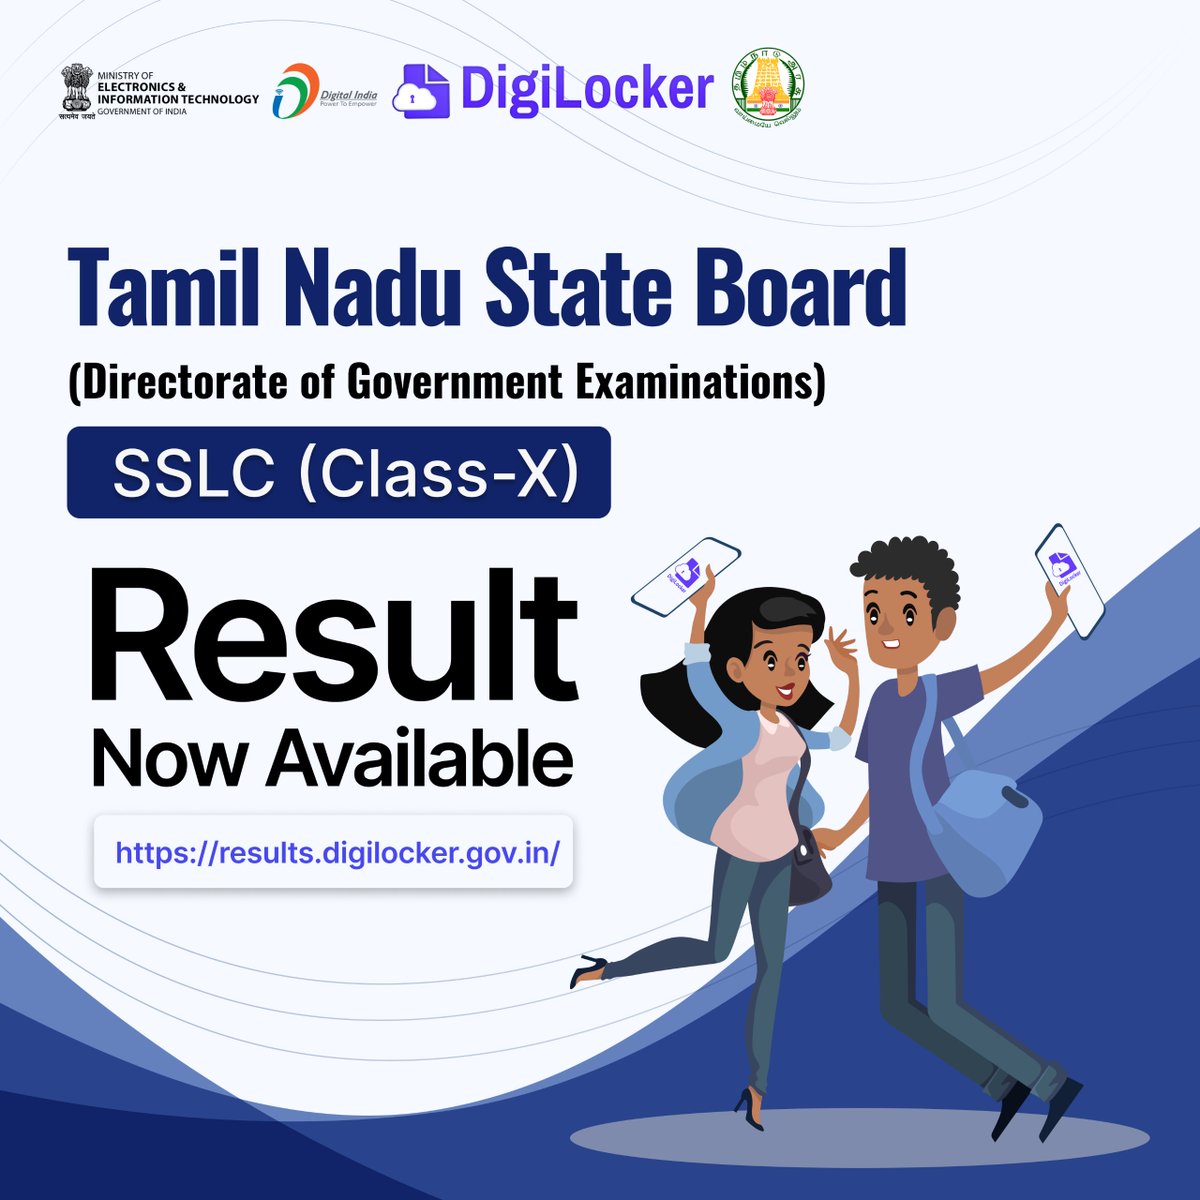 Good News! Tamil Nadu State Board (Directorate of Government Examinations) #SSLC (Class-X) Result is now available on DigiLocker Result Page. Access it instantly at results.digilocker.gov.in Congratulations to all the students on their achievements. #DigiLocker #TamilNadu